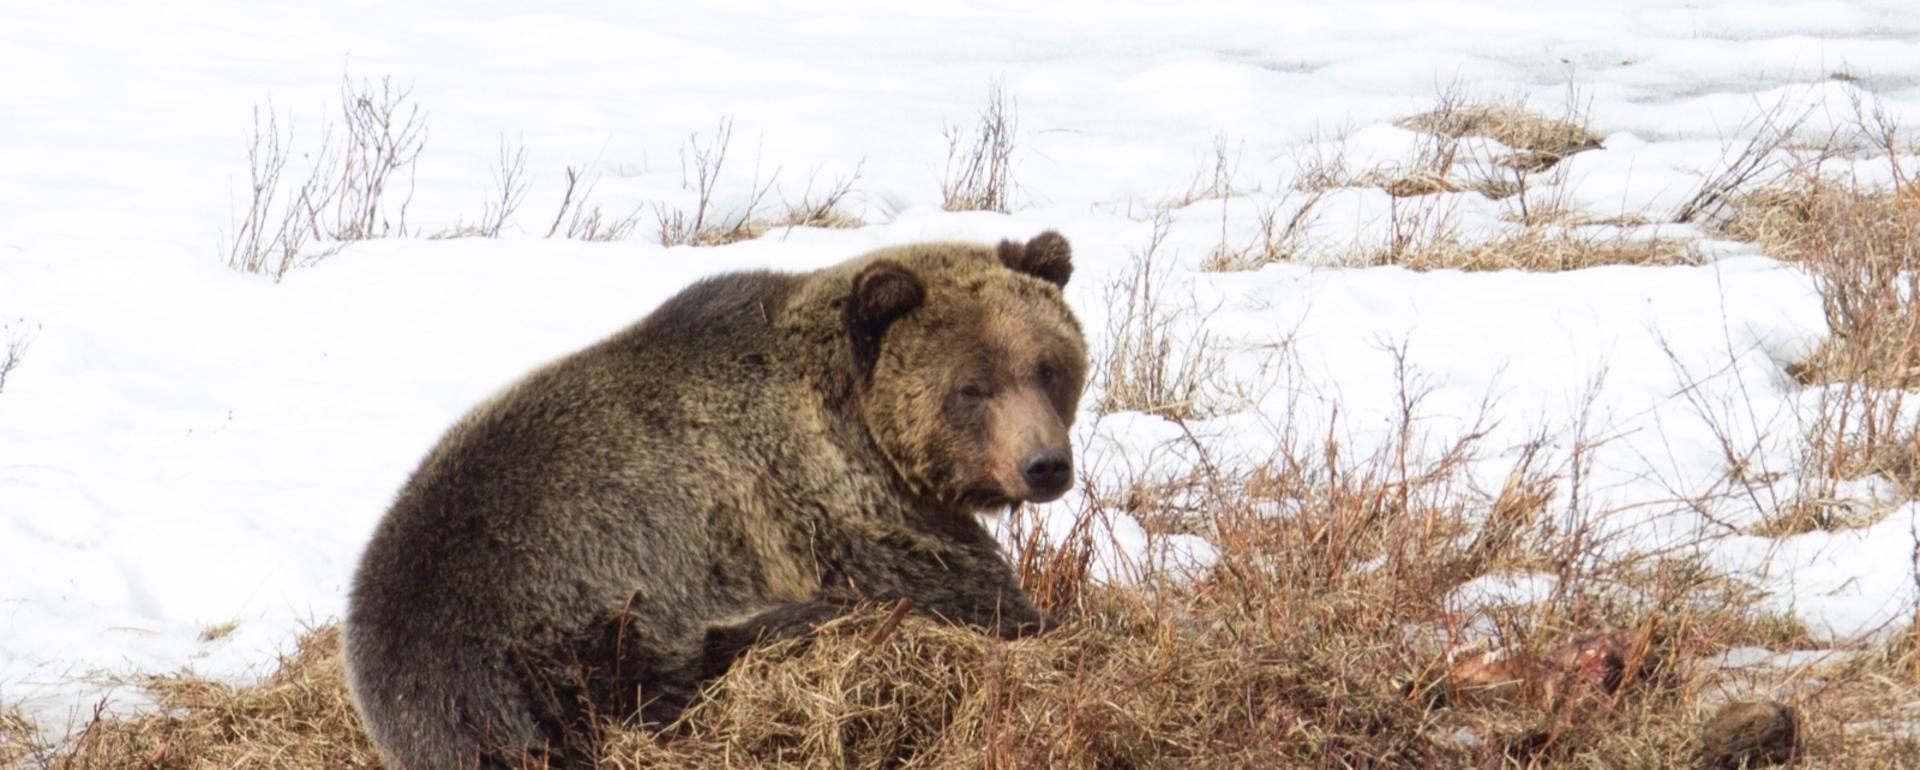 Grizzly on a carcass